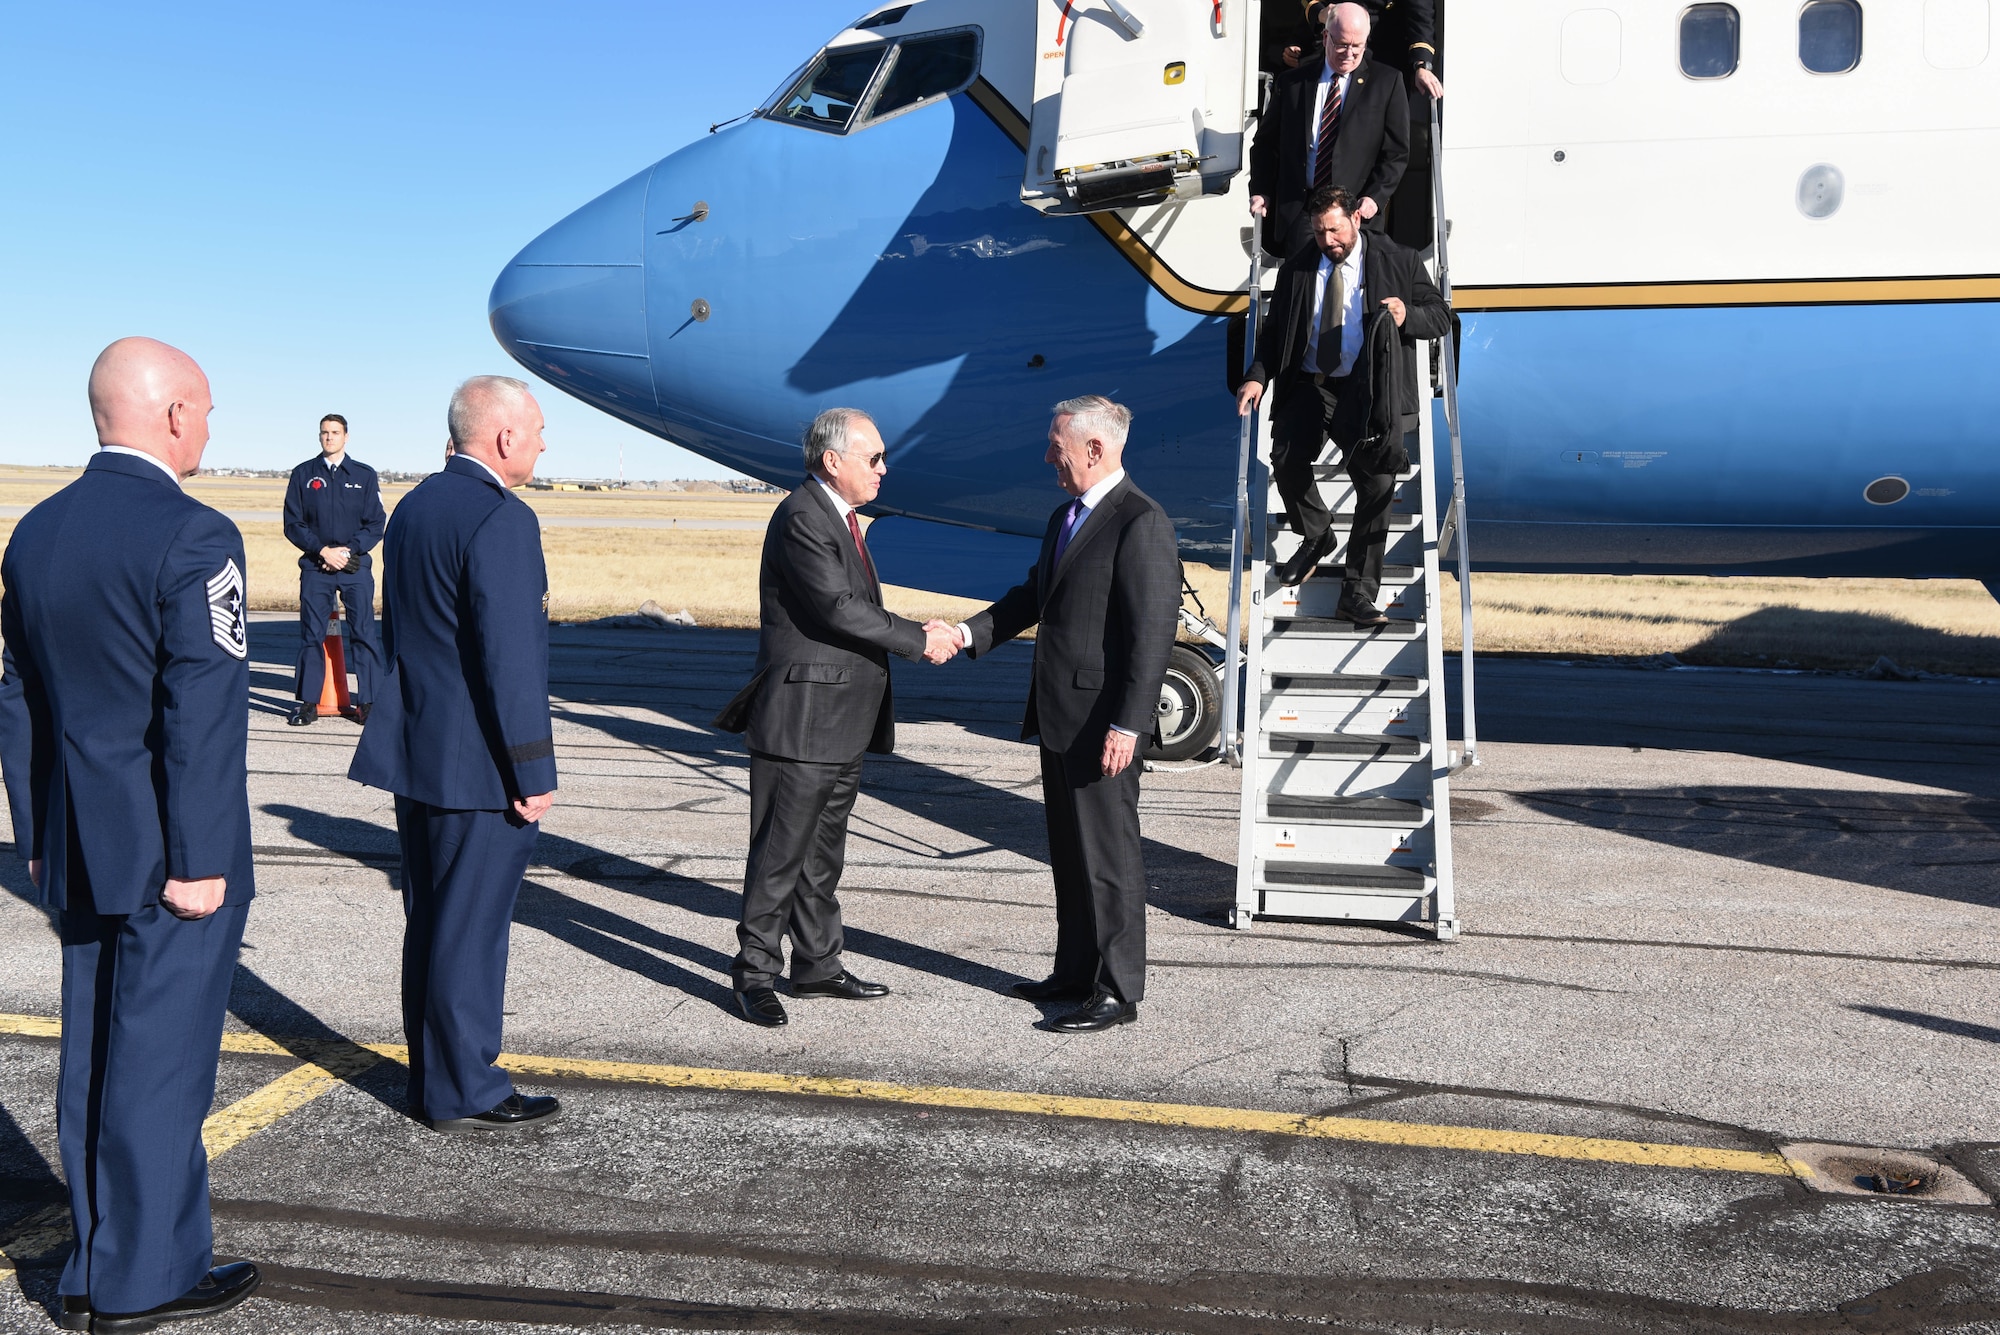 Jose Romualdez, Philippine Ambassador to the United States, Maj. Gen. Fred Stoss, 20th Air Force commander, and Chief Master Sgt. Thomas Good, 20th Air Force command chief, greets Defense Secetary James N. Mattis plade side Nov. 14, 2018, at Cheyenne Regional Airport, Wyo. Suring the Defense Secretary's visit to F.E. Warren Air Force Base, Wyo., the Bells of Balangiga were officially presented to the Philippine government. (U.S. Air Force photo by Airman 1st Class Abbigayle Wagner)